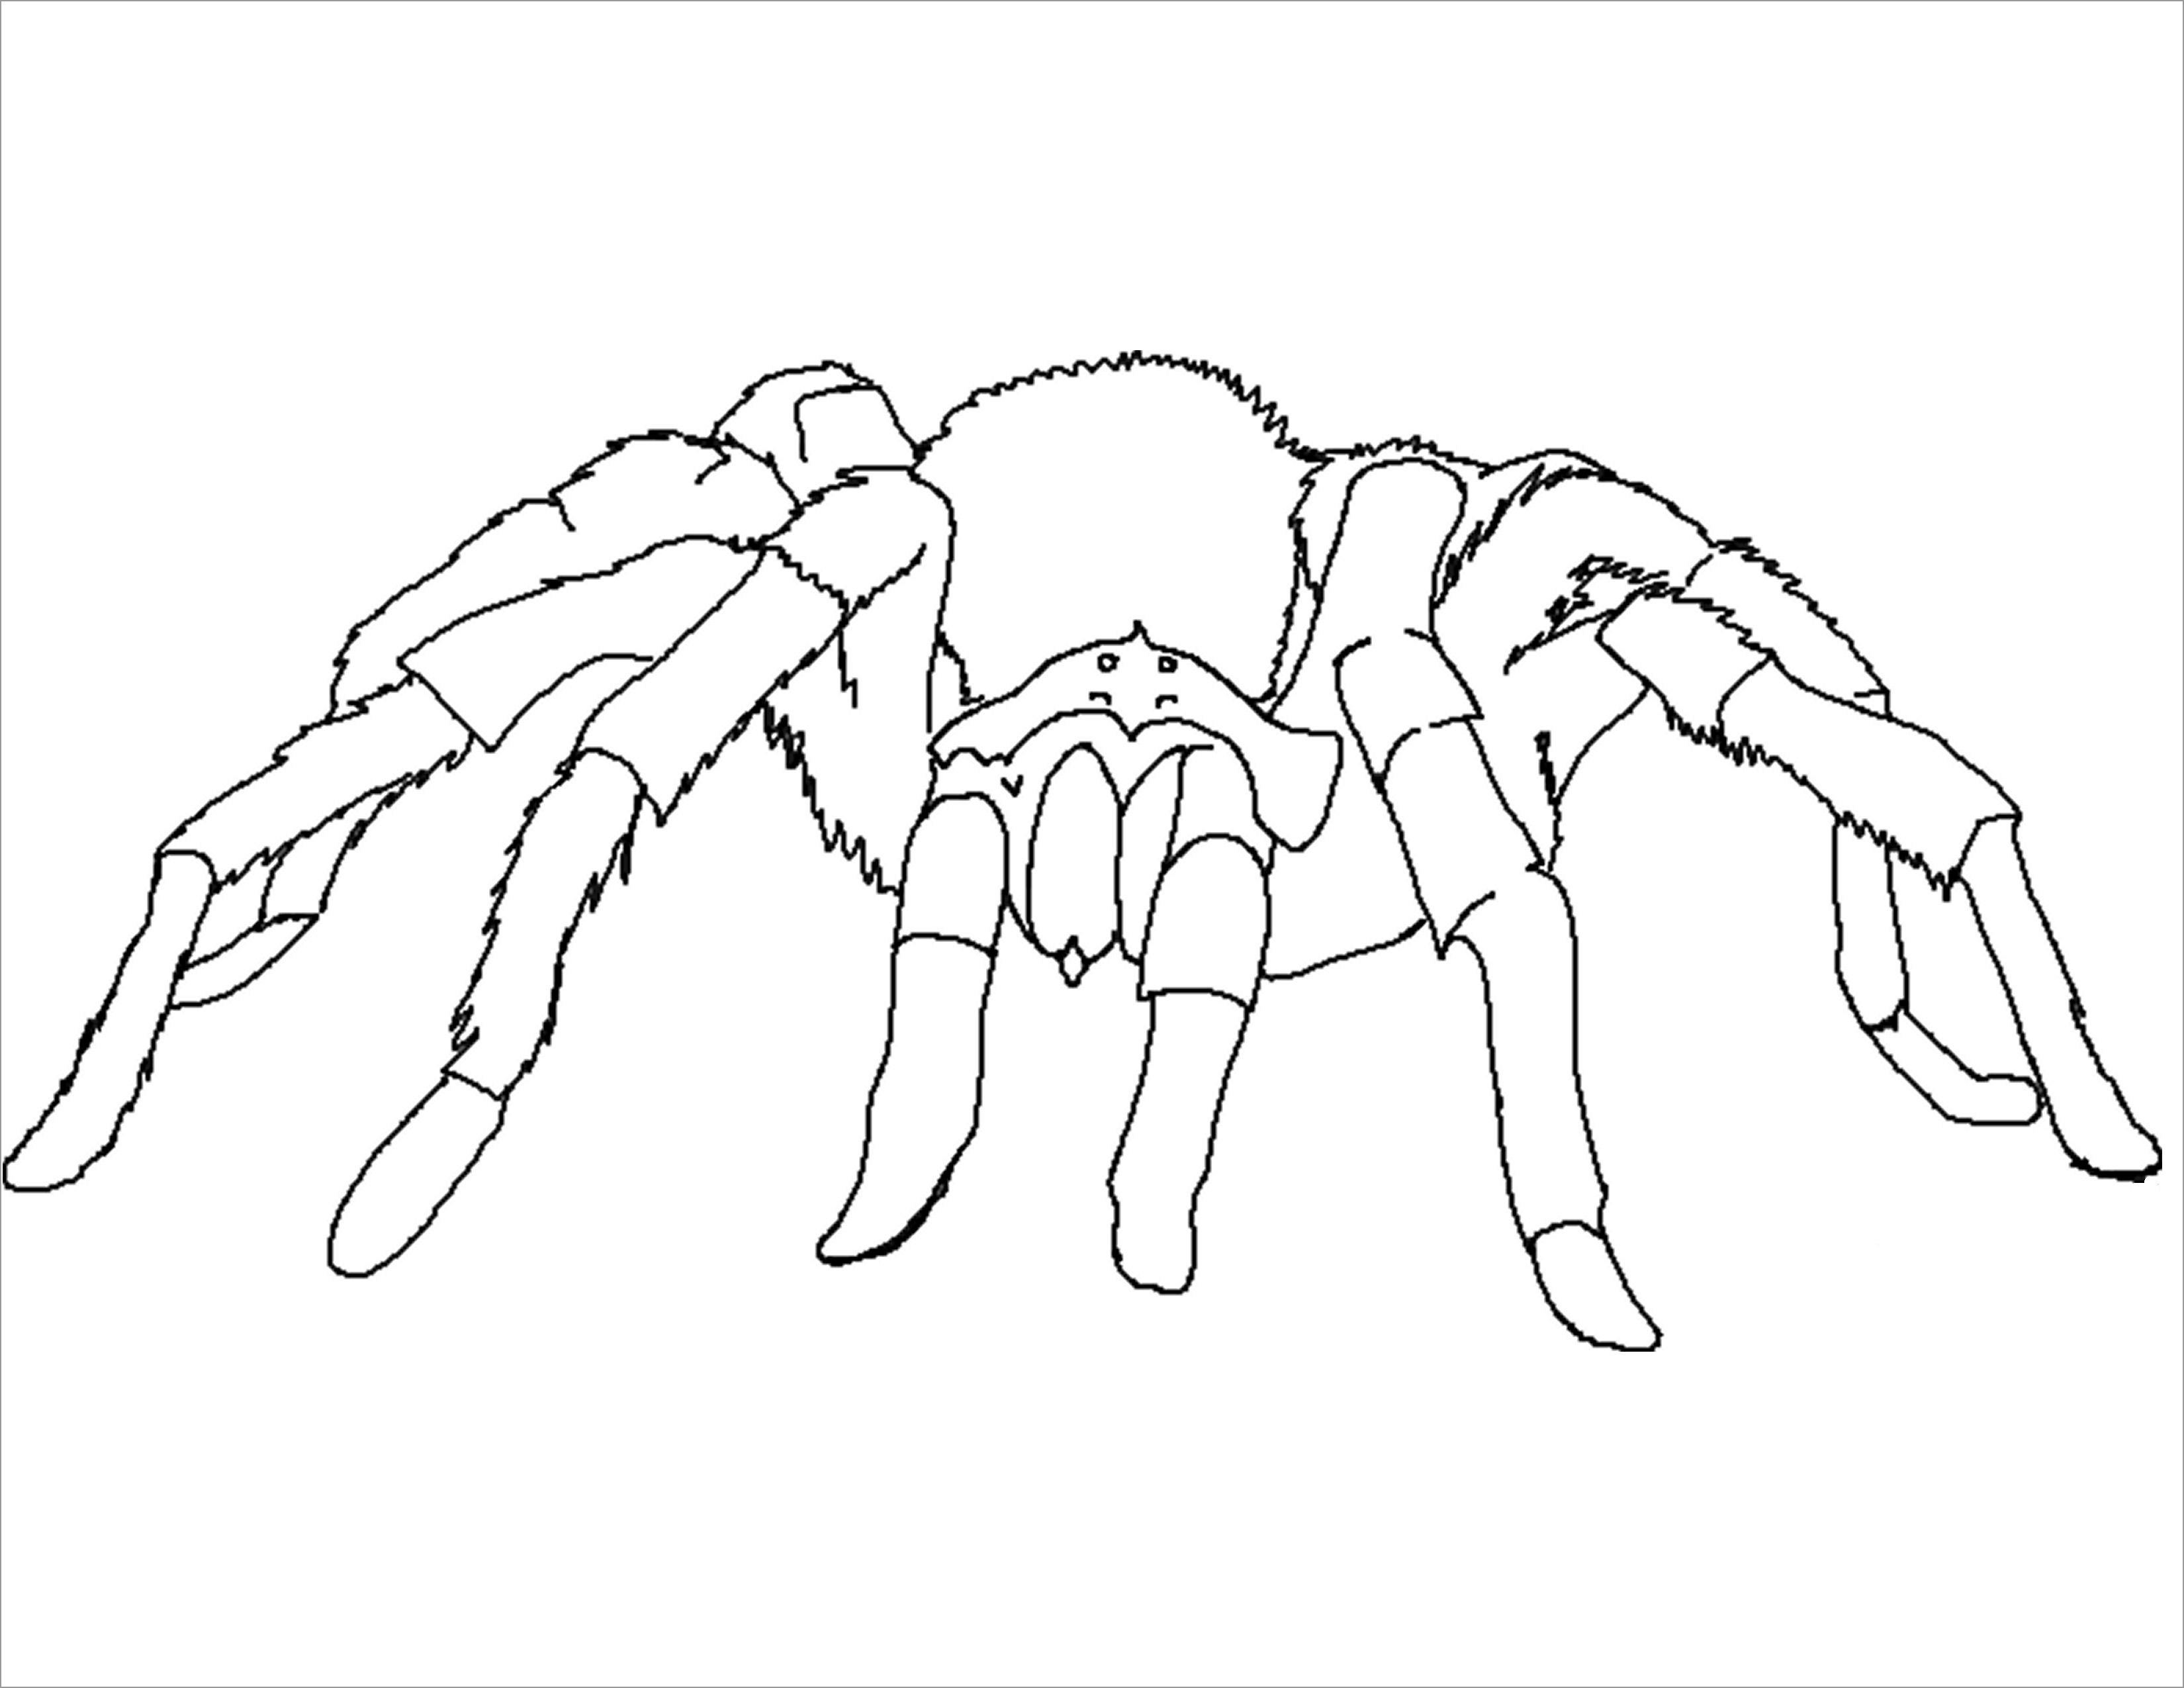 Printable Spider Coloring Page